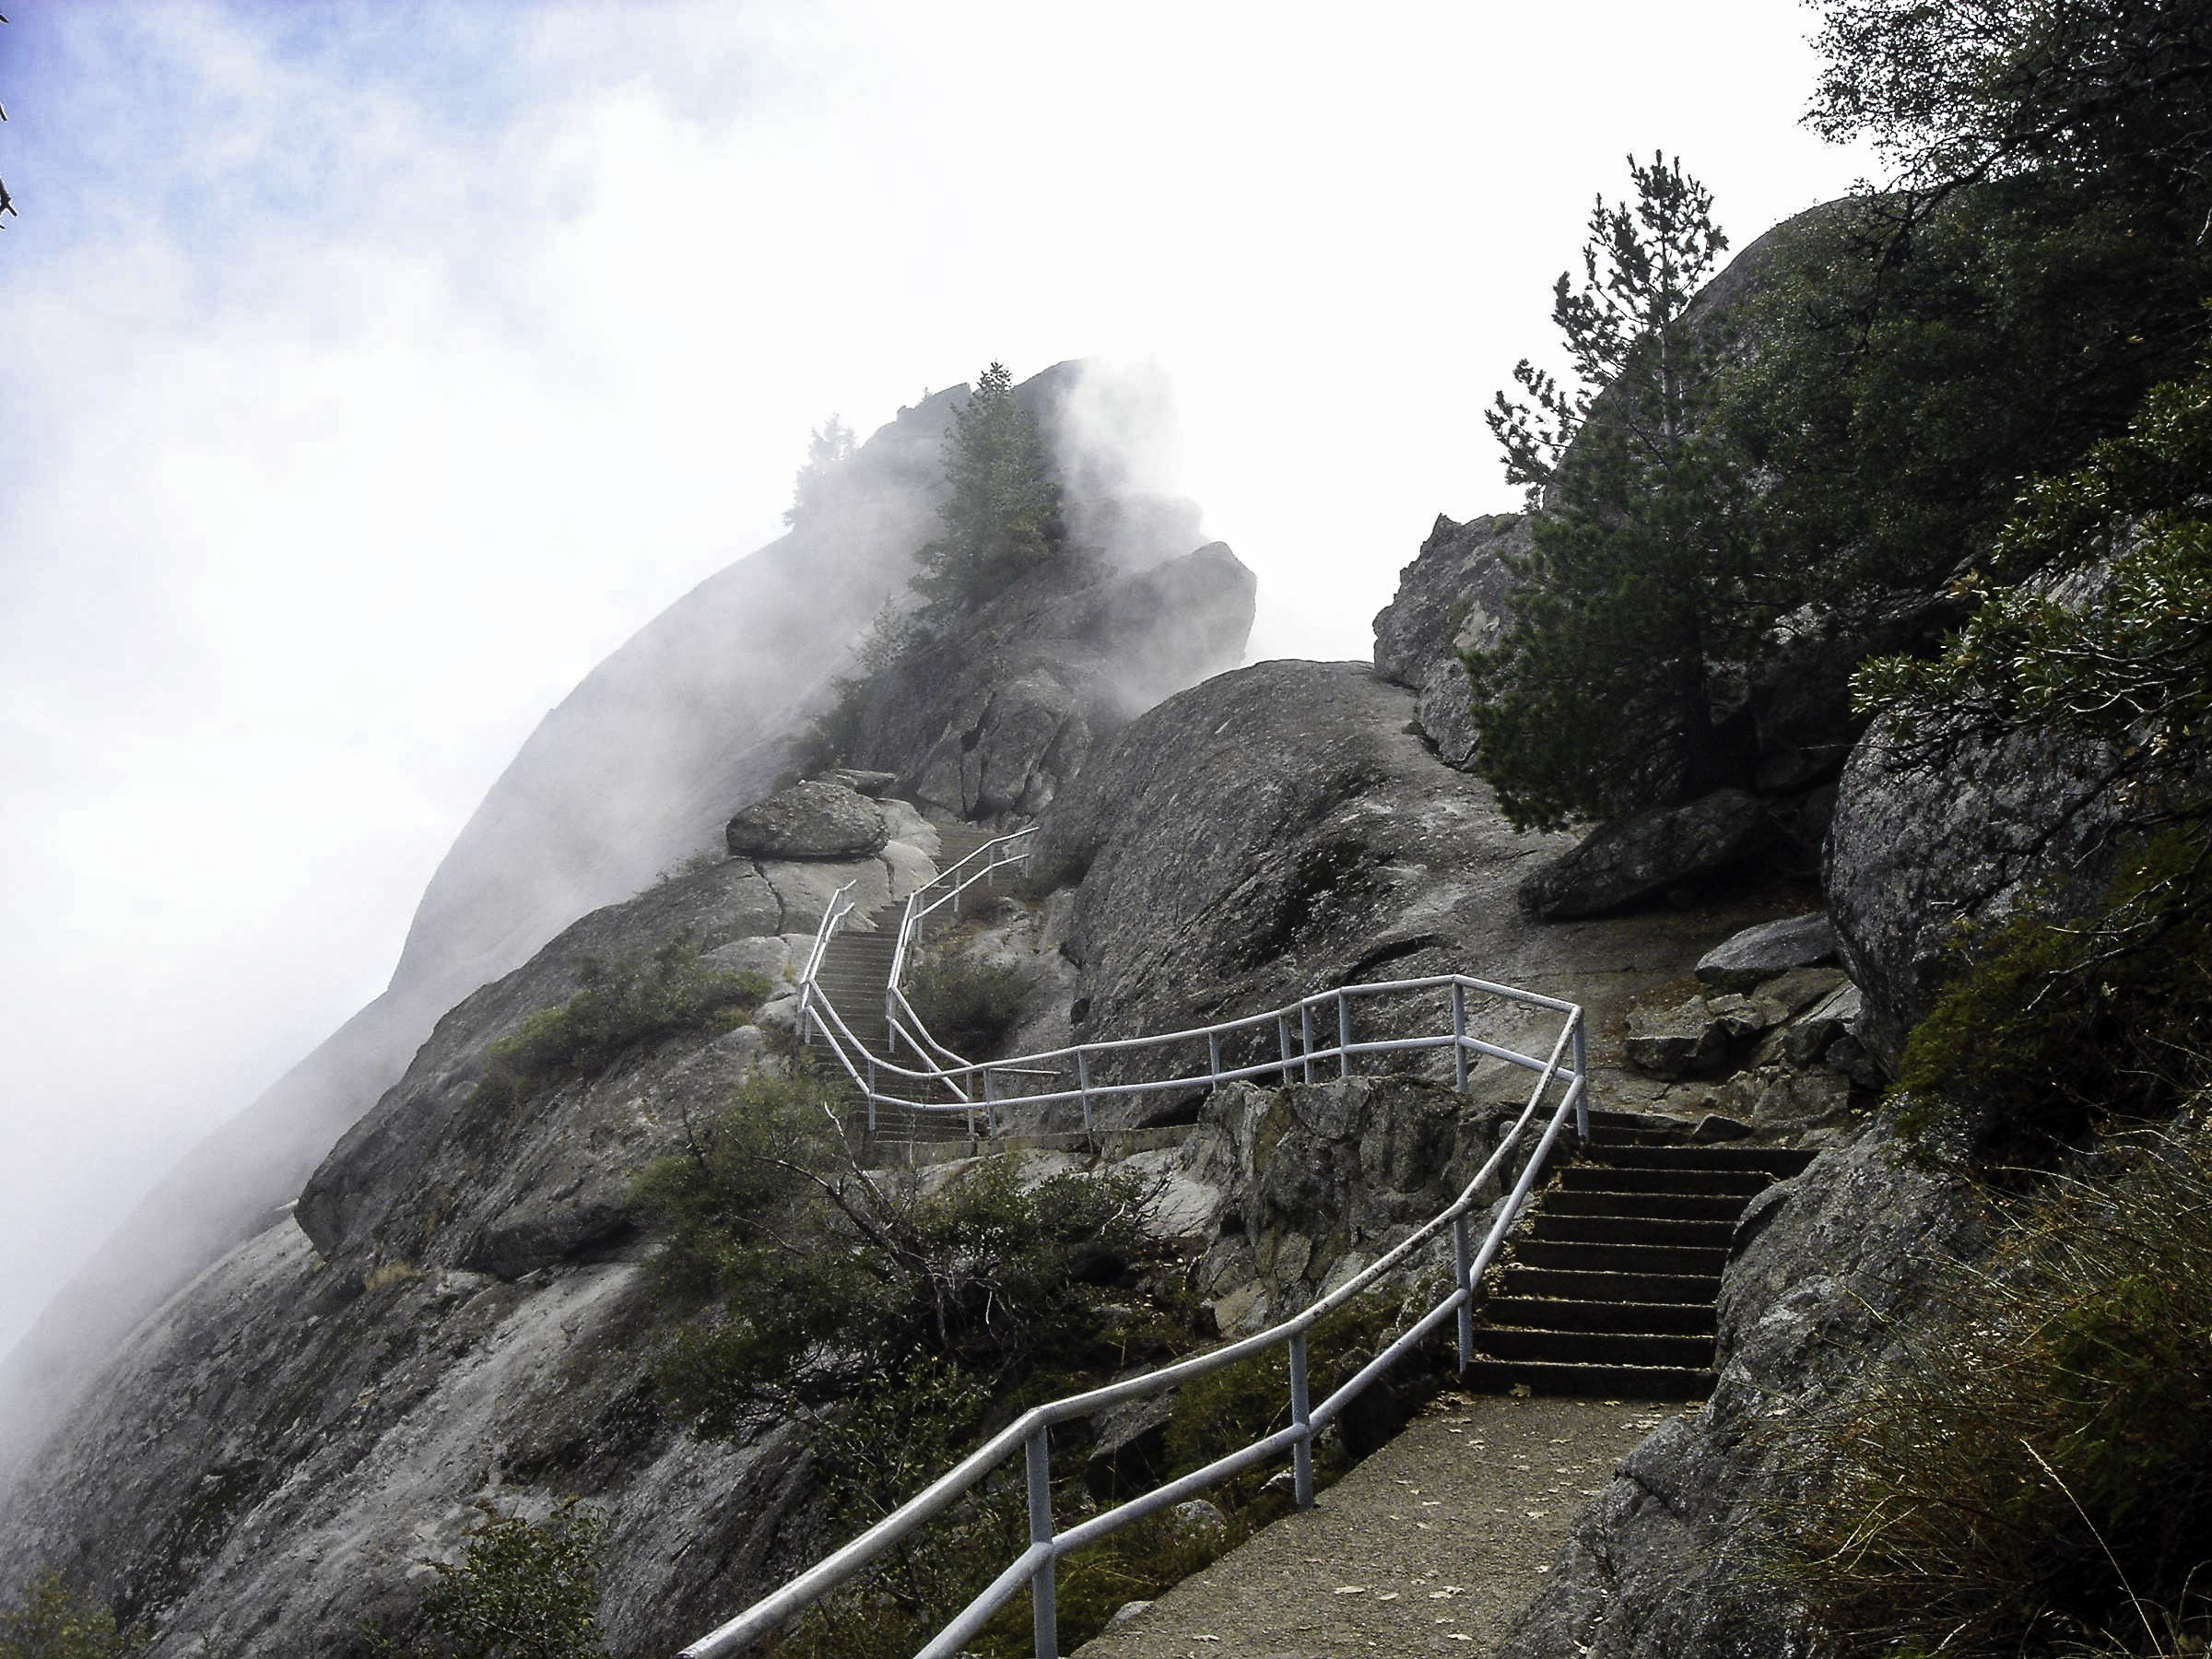 2400x1800 Trail up Moro Rock in Sequoia National Park, California image Free stock photo Public Domain photo CC0 Images